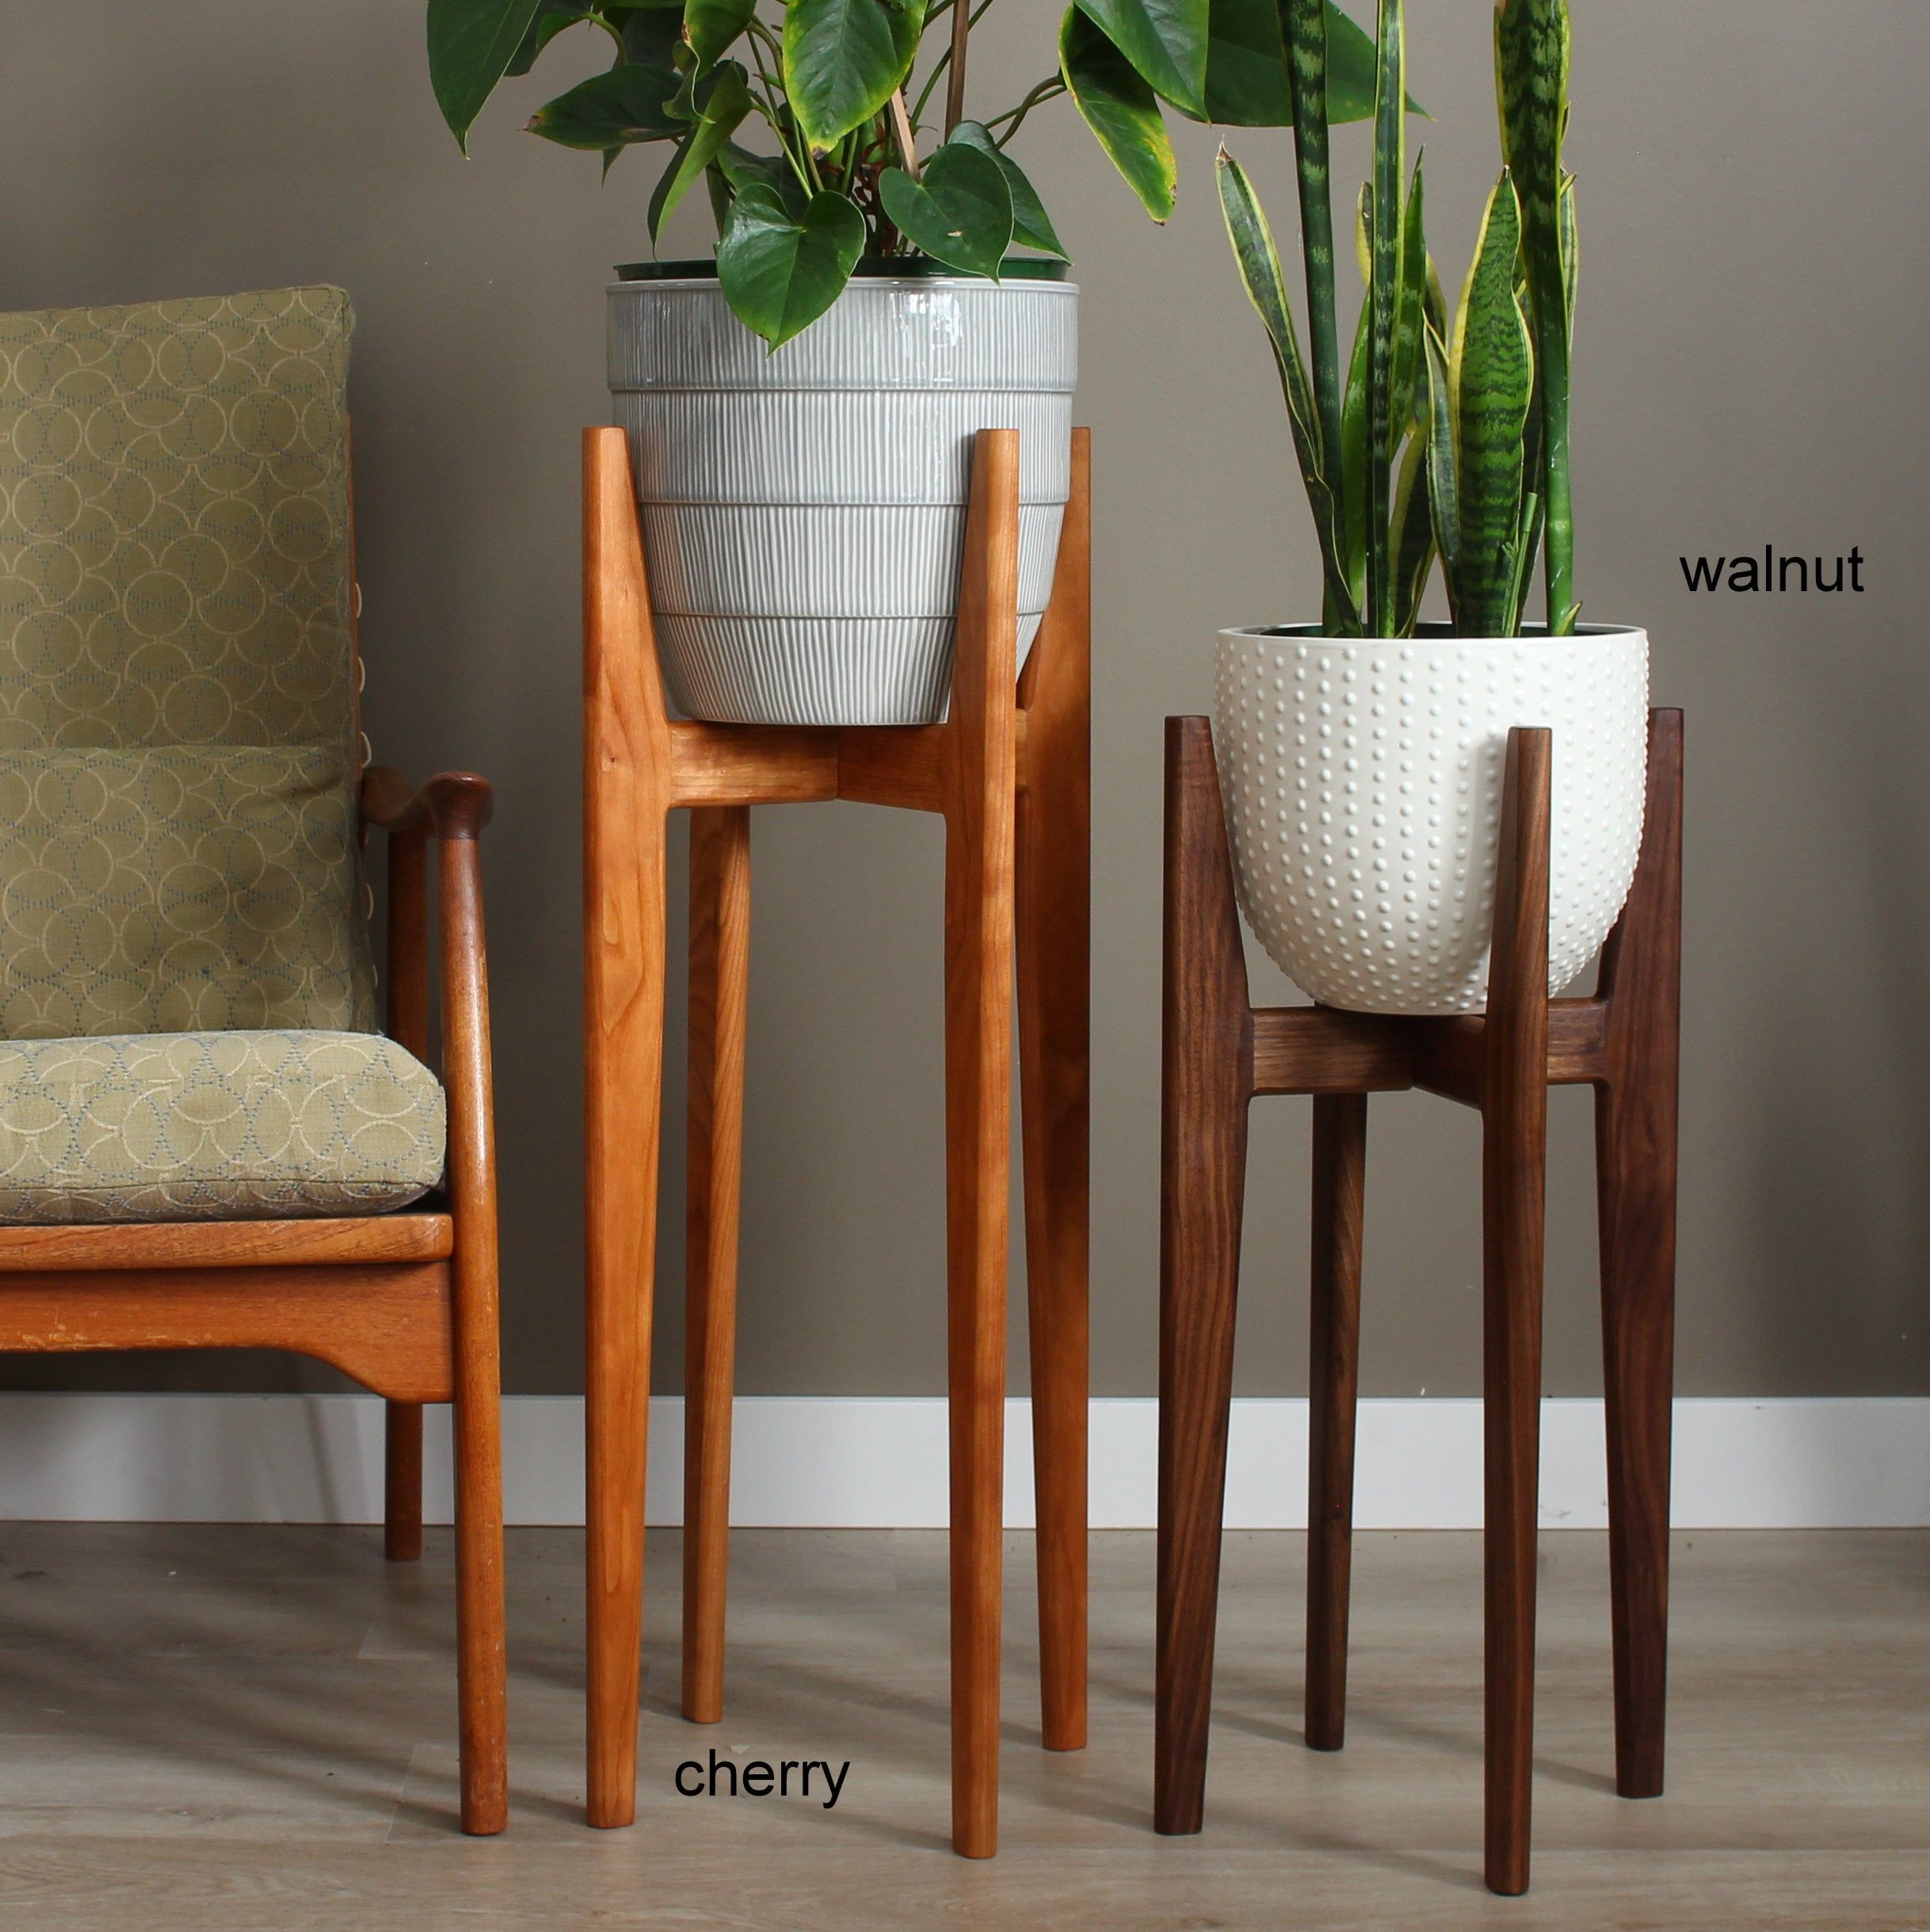 Mid Century Modern Plant Stand Our Original Design Indoor – Etsy Within Wood Plant Stands (View 7 of 15)